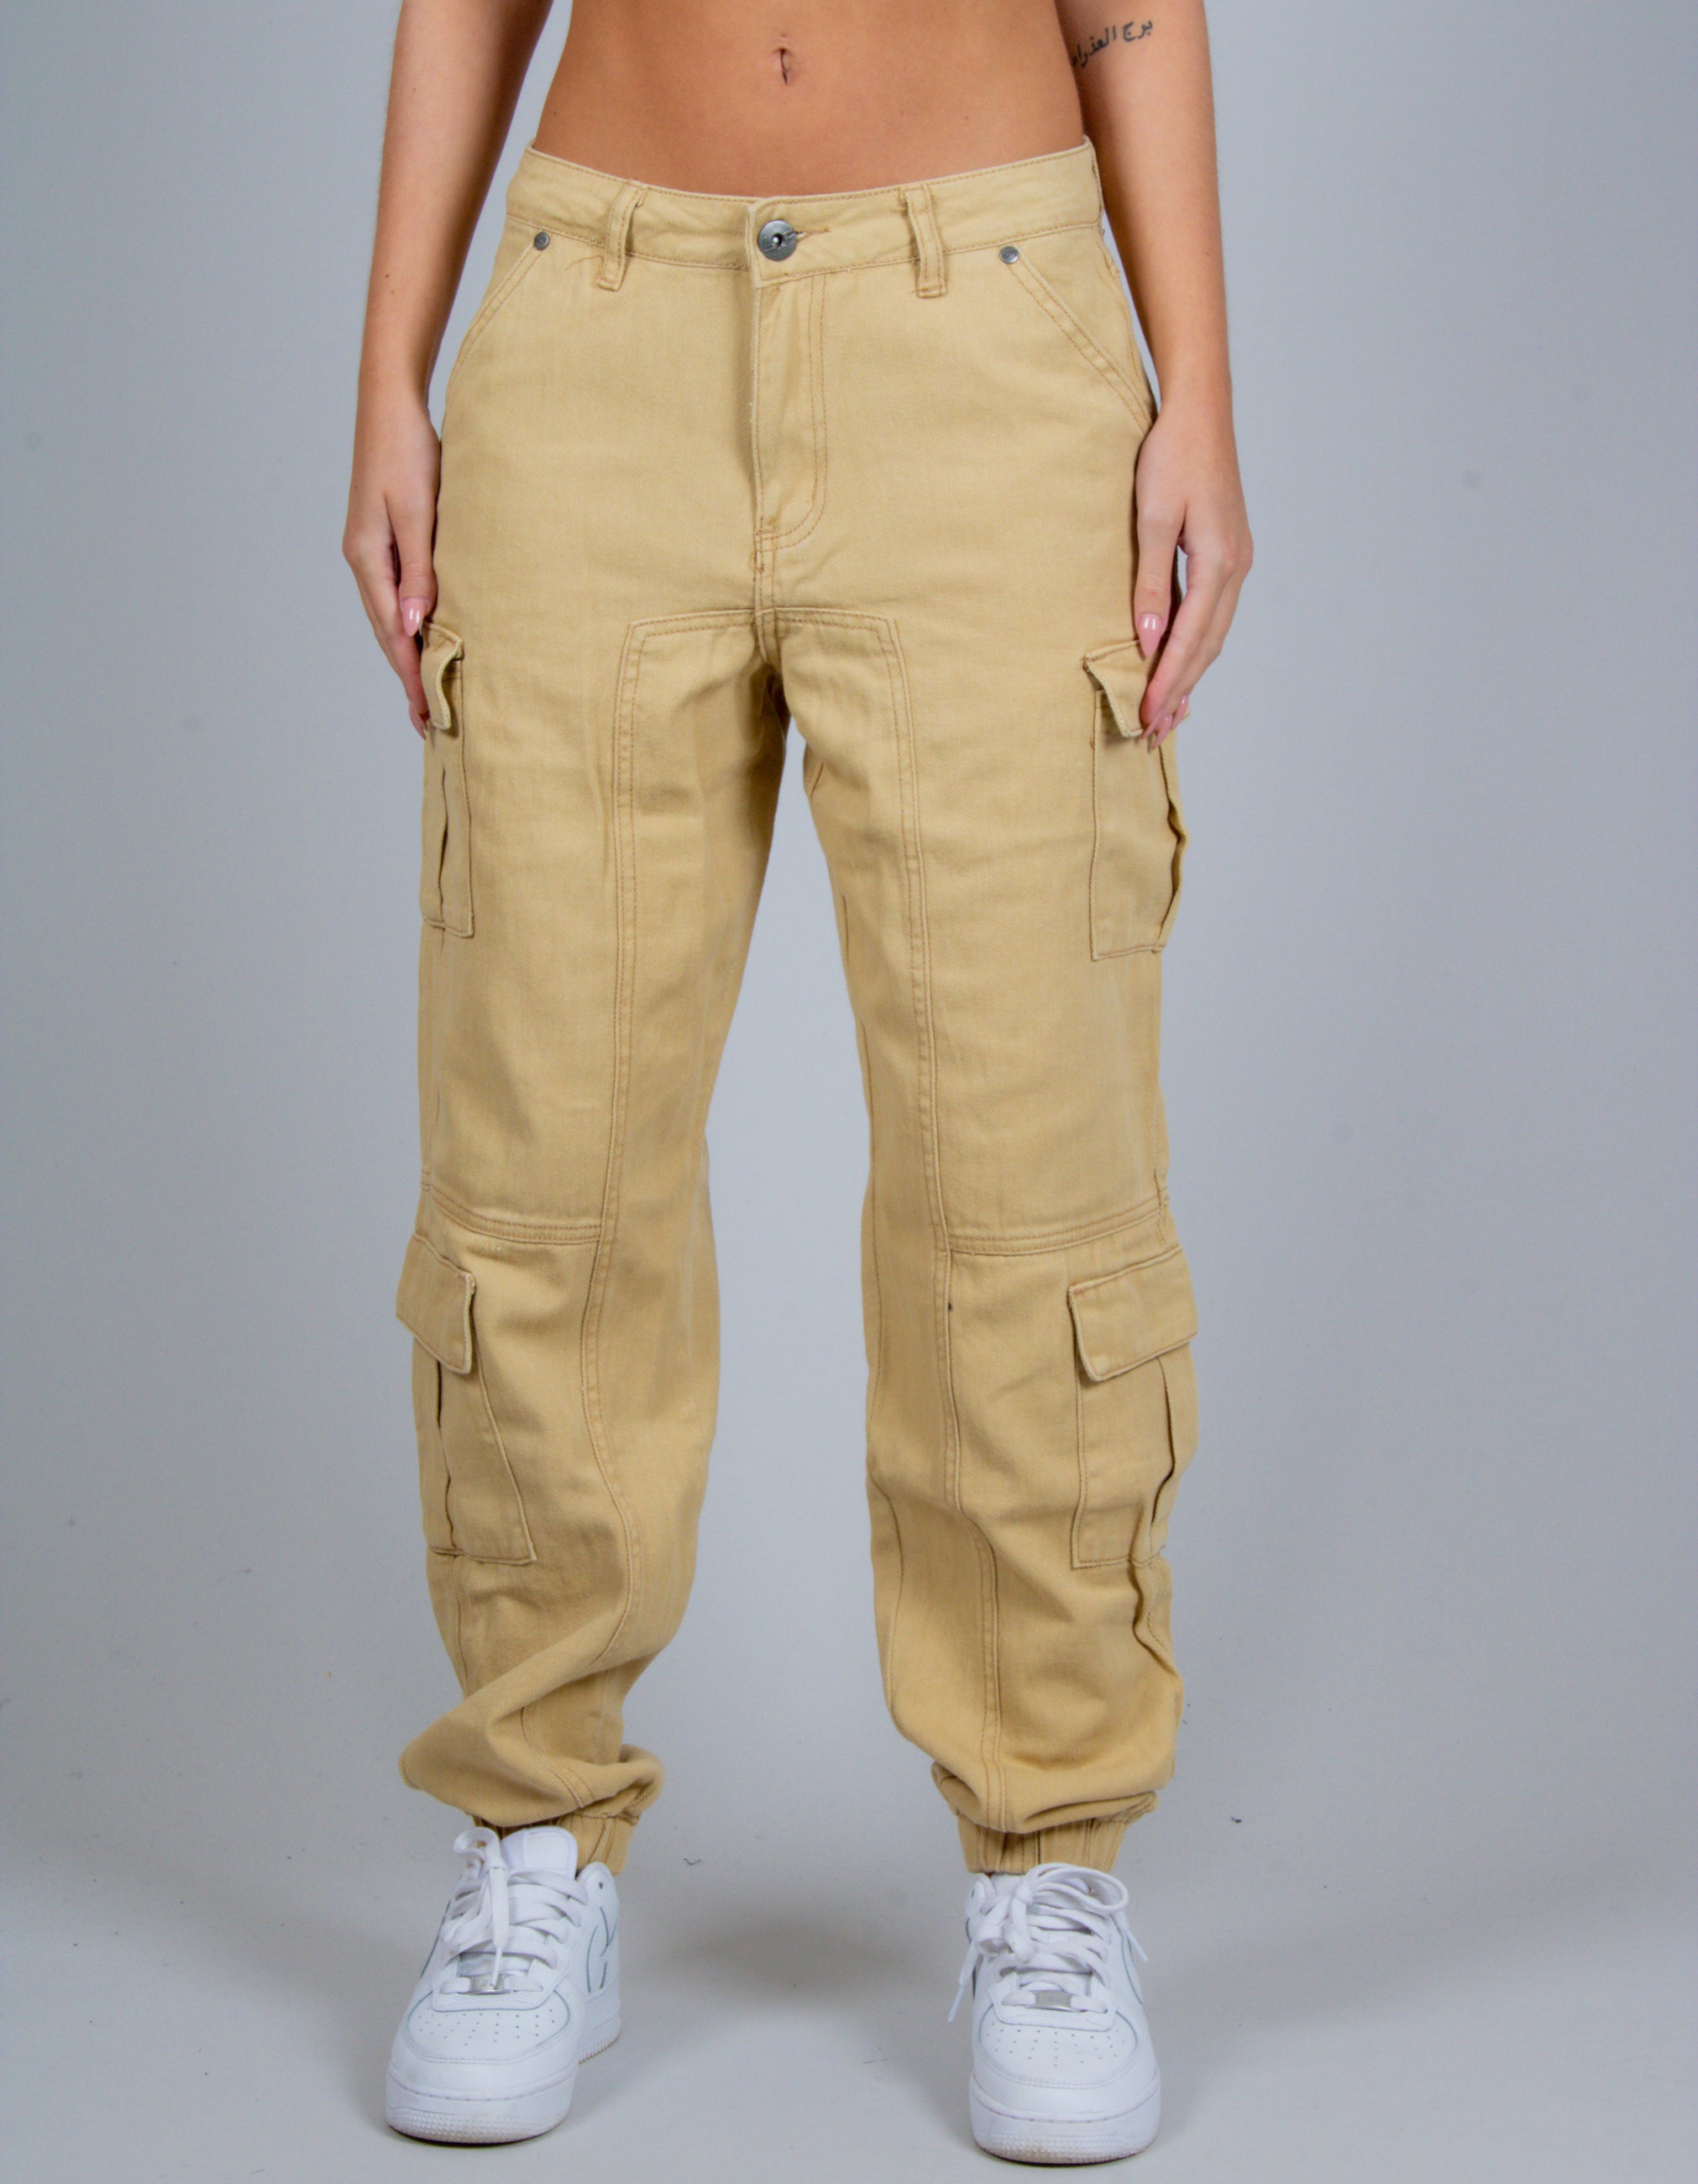 Relaxed Fit Cargo Trousers in Tan Twill Denim